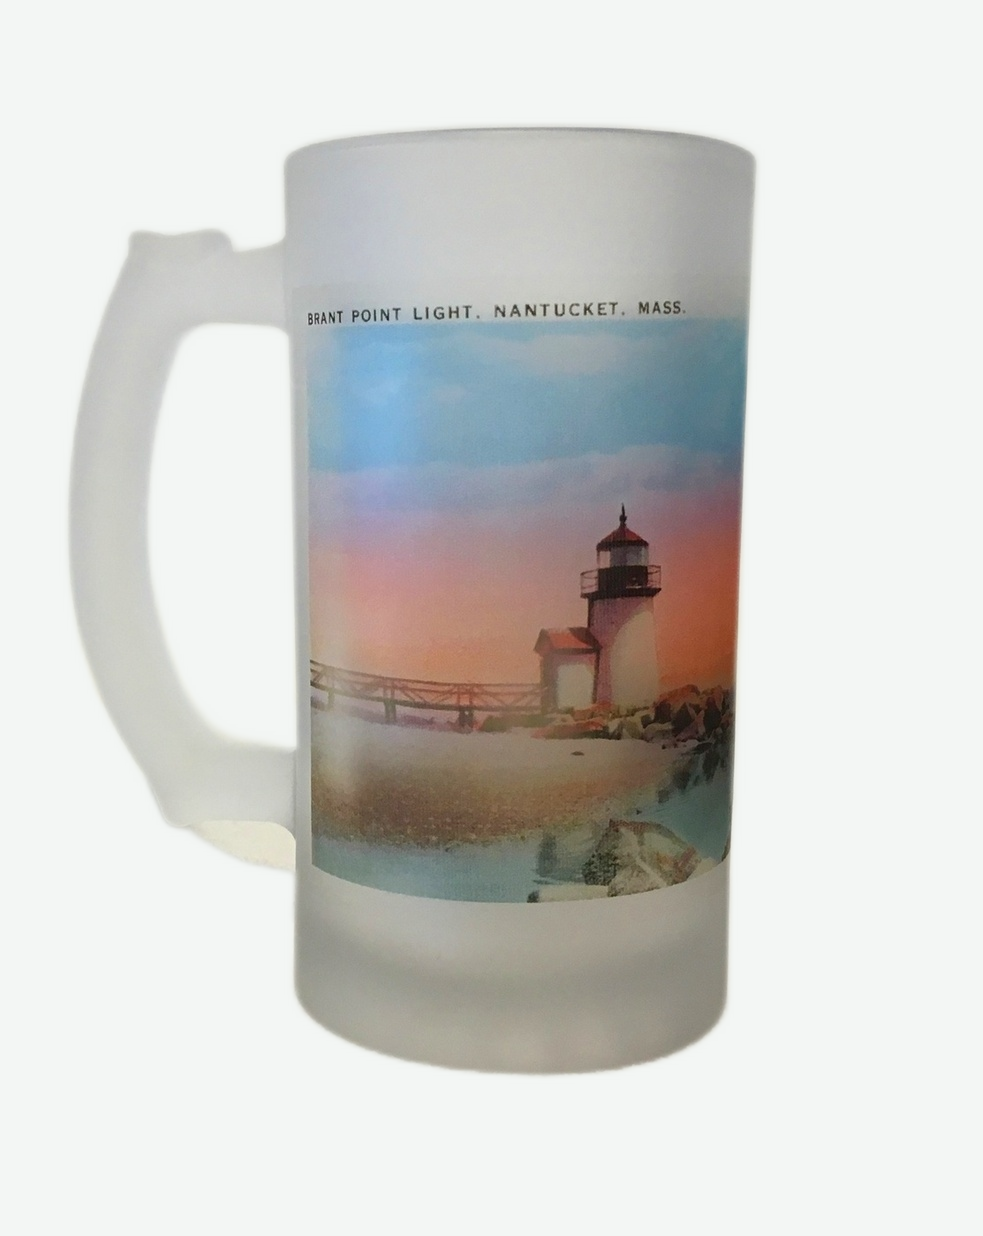 Colorful Frosted Glass Mug of Brant Point Light in Nantucket